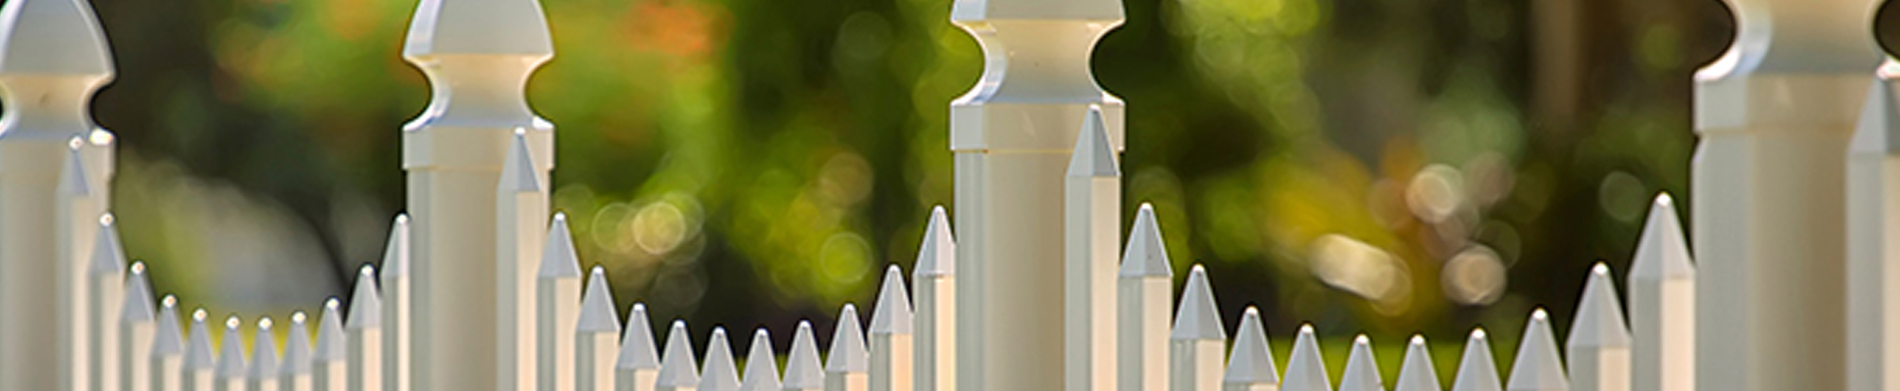 Vinyl Fences in Arizona: Is It the Right Choice?